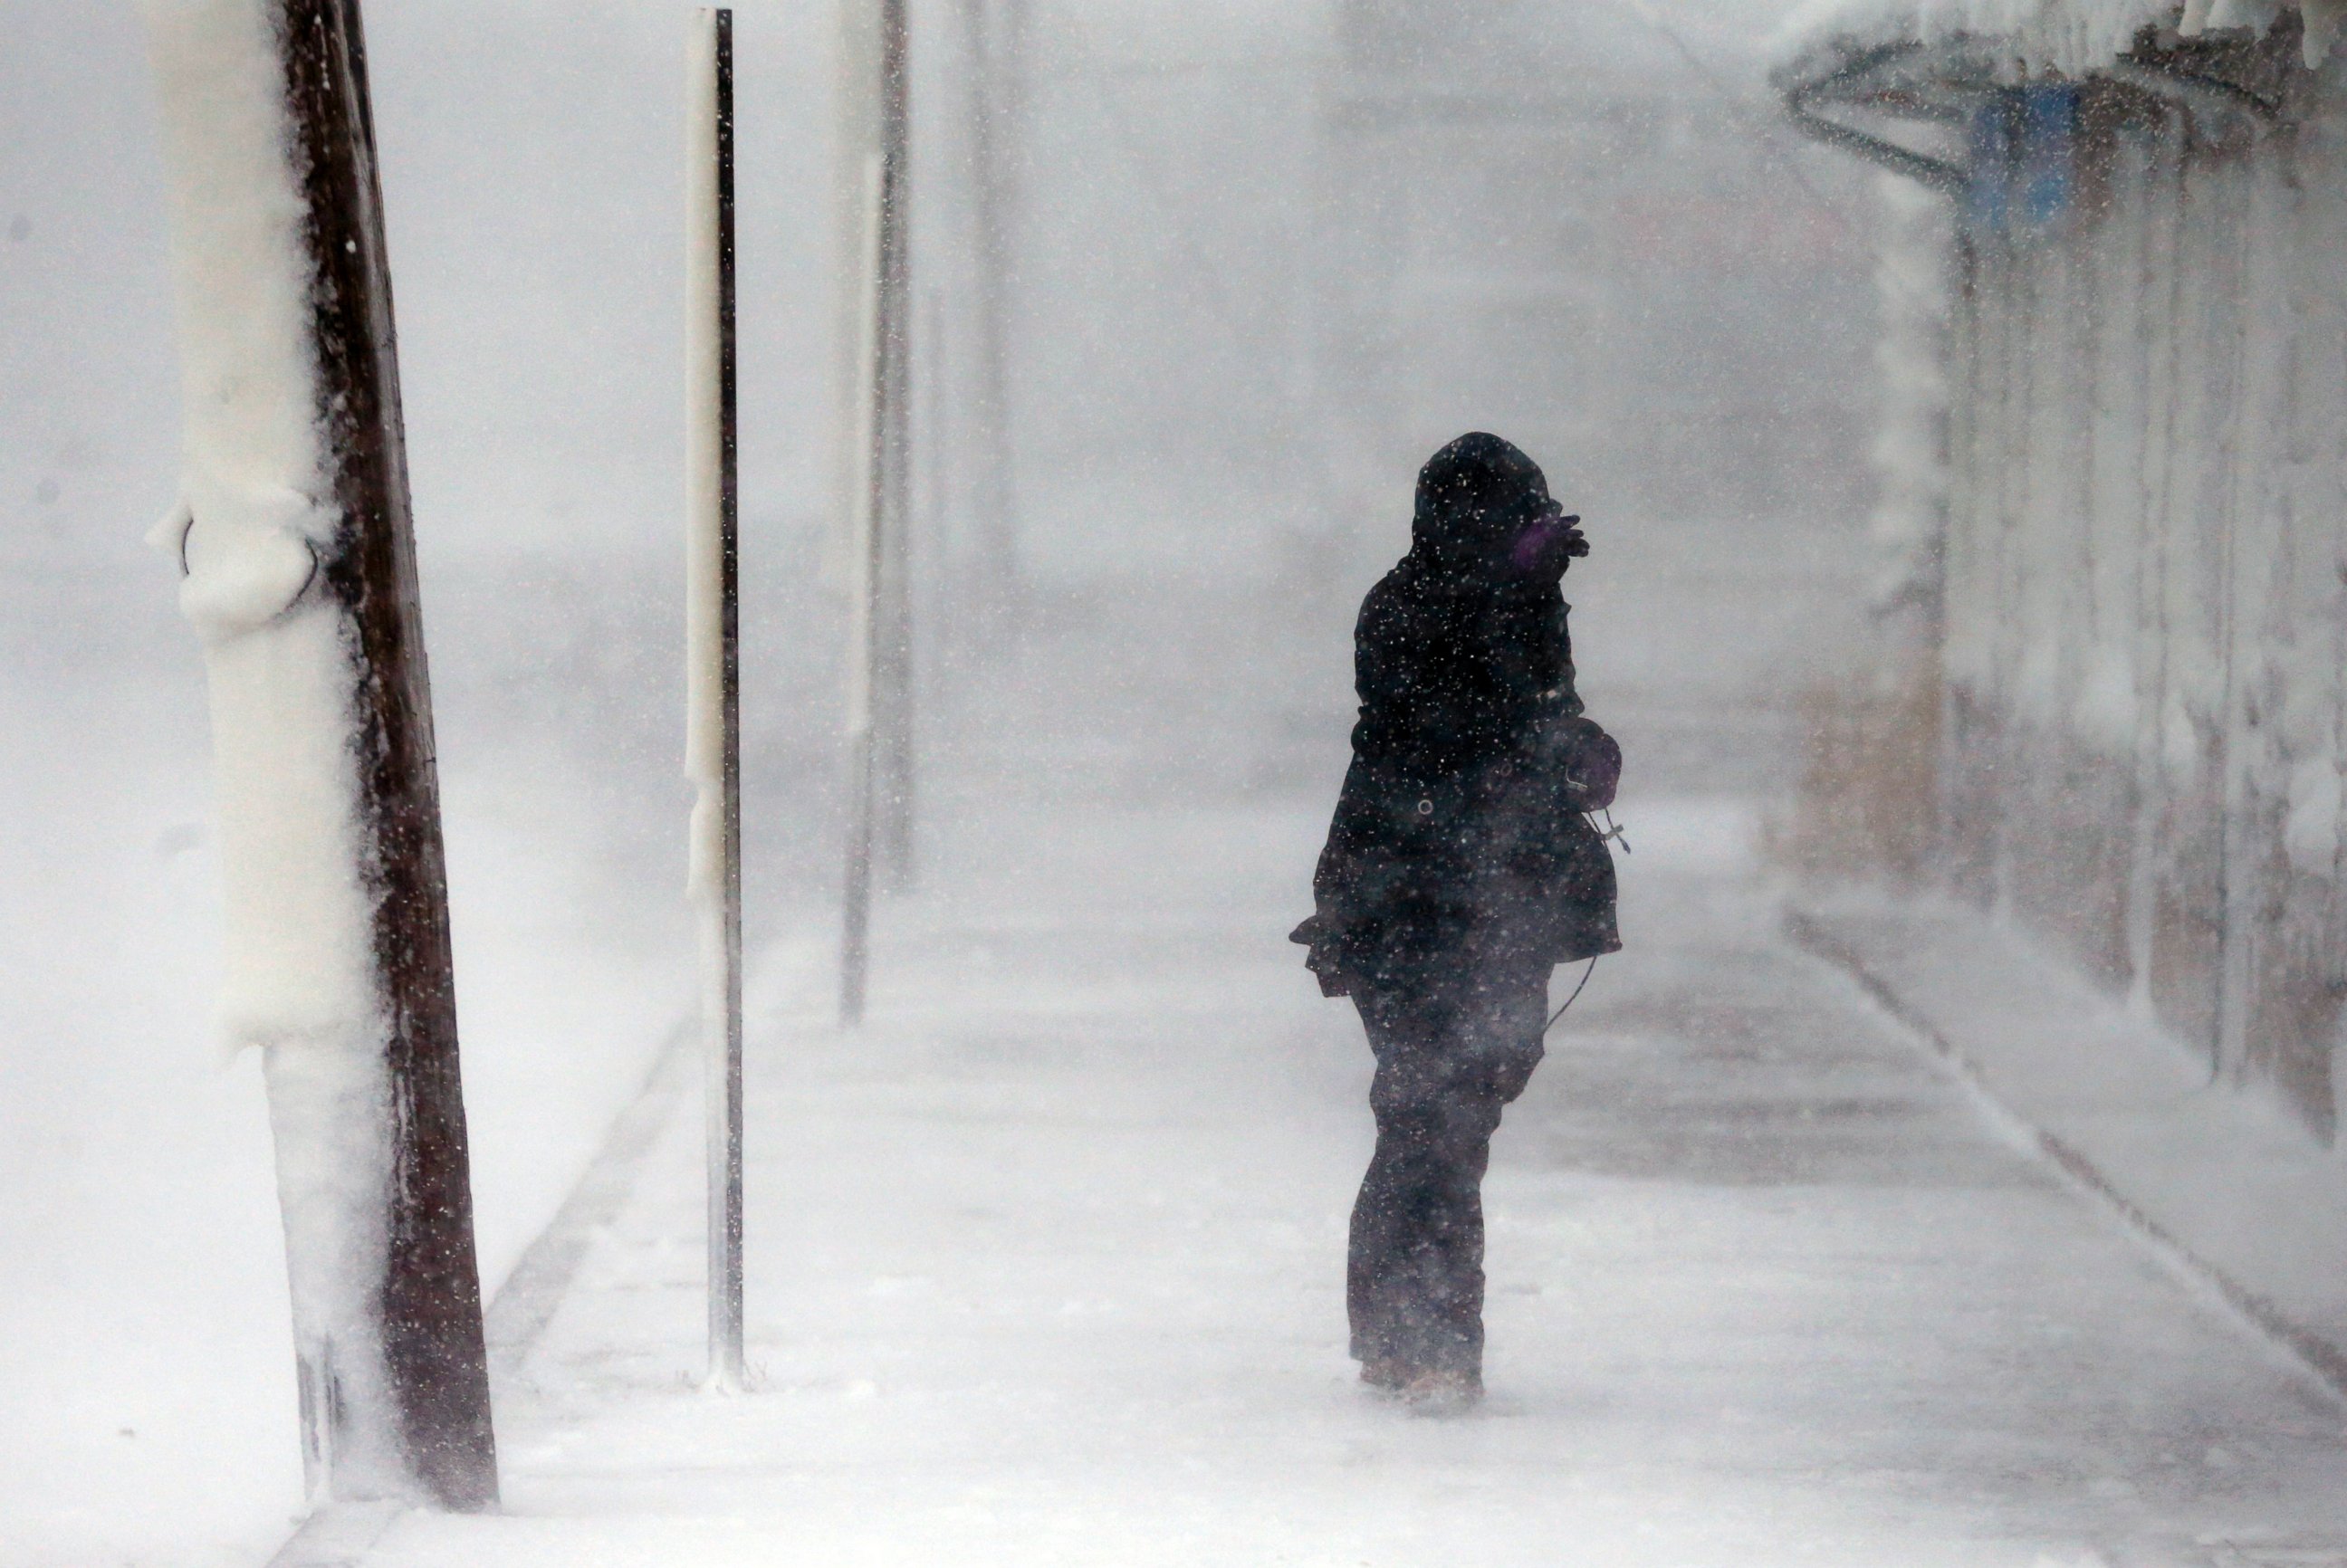 PHOTO: A woman braces against the wind during a winter storm in Marshfield, Mass., Jan. 27, 2015.